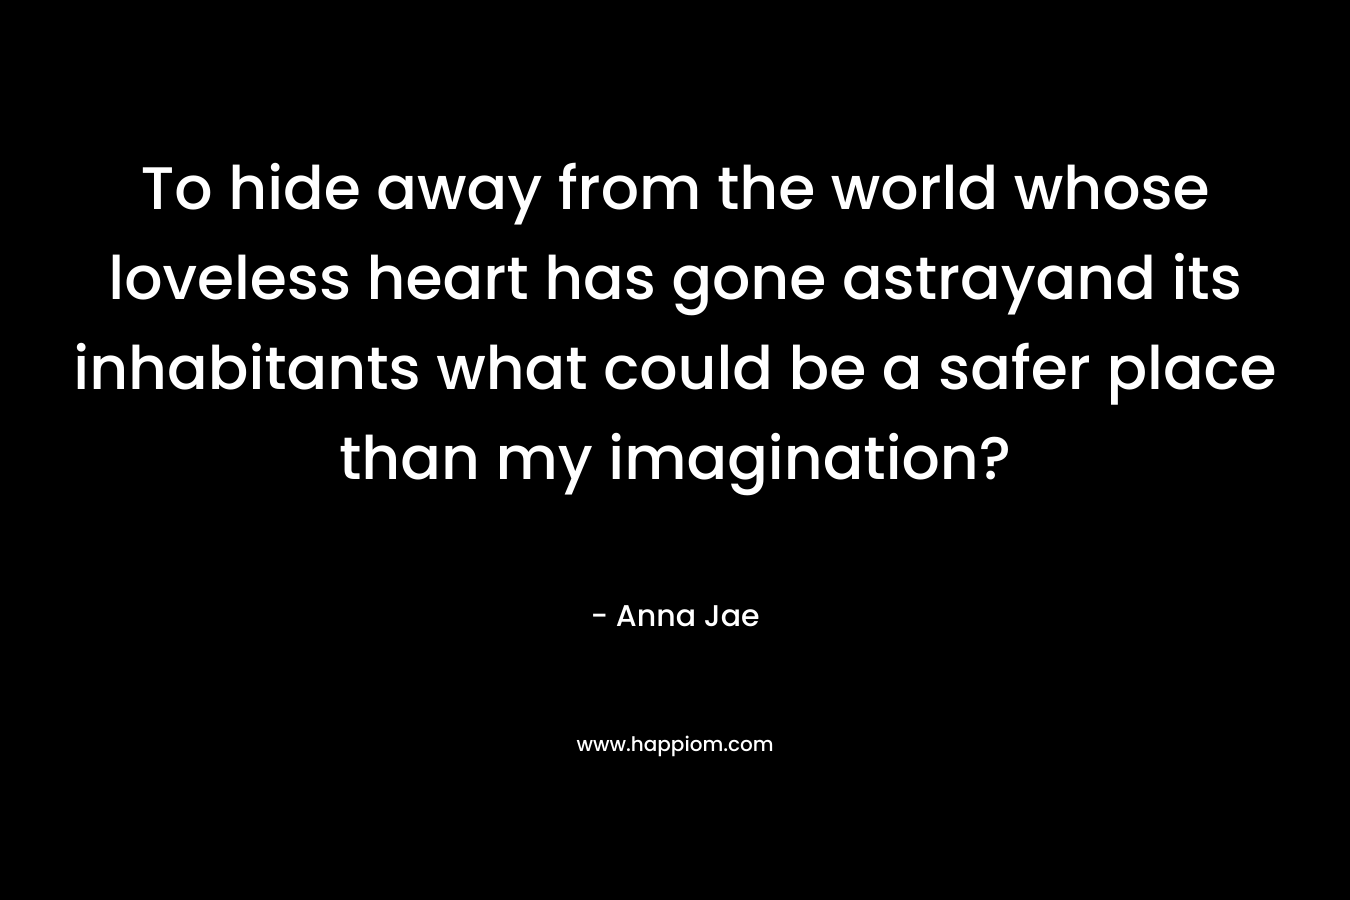 To hide away from the world whose loveless heart has gone astrayand its inhabitants what could be a safer place than my imagination? – Anna Jae